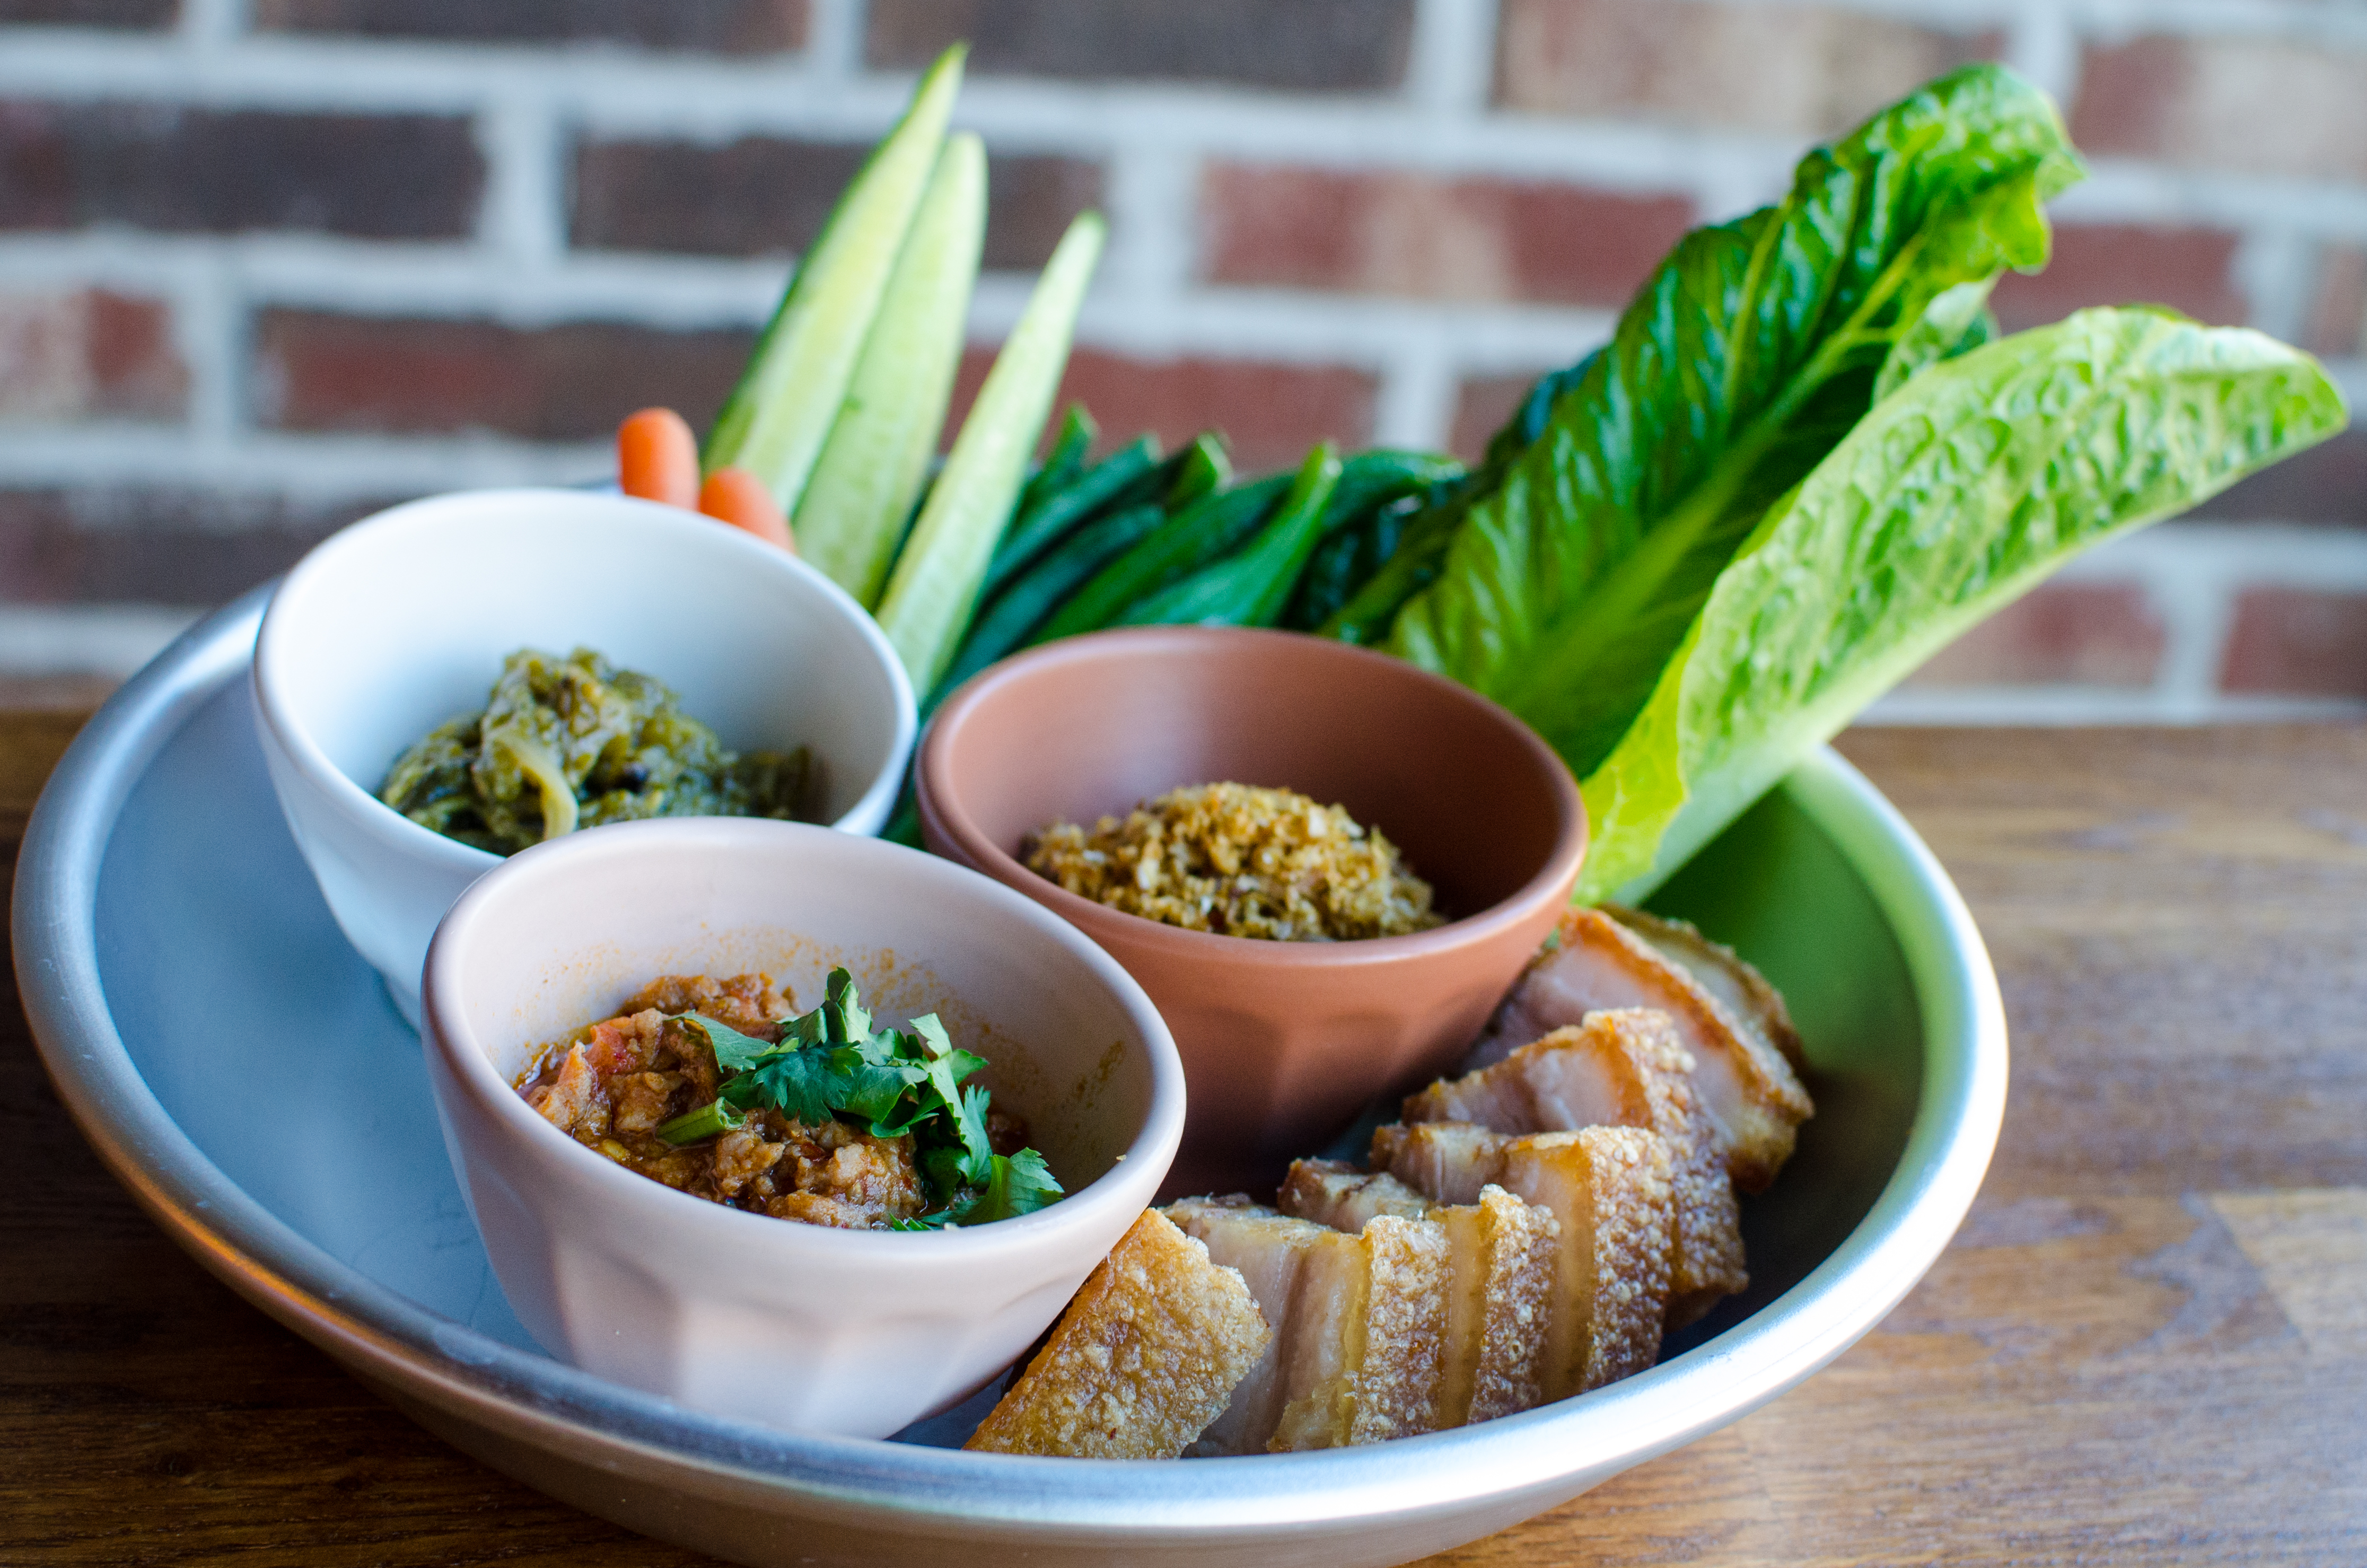 A round silver tray sits on a wooden table in front of a brick wall. On the tray, there are three small bowls — one white, one pink, one red —&nbsp;each holding a different Thai chile paste. Some vegetables and chunks of crispy pork belly are also on the tray.